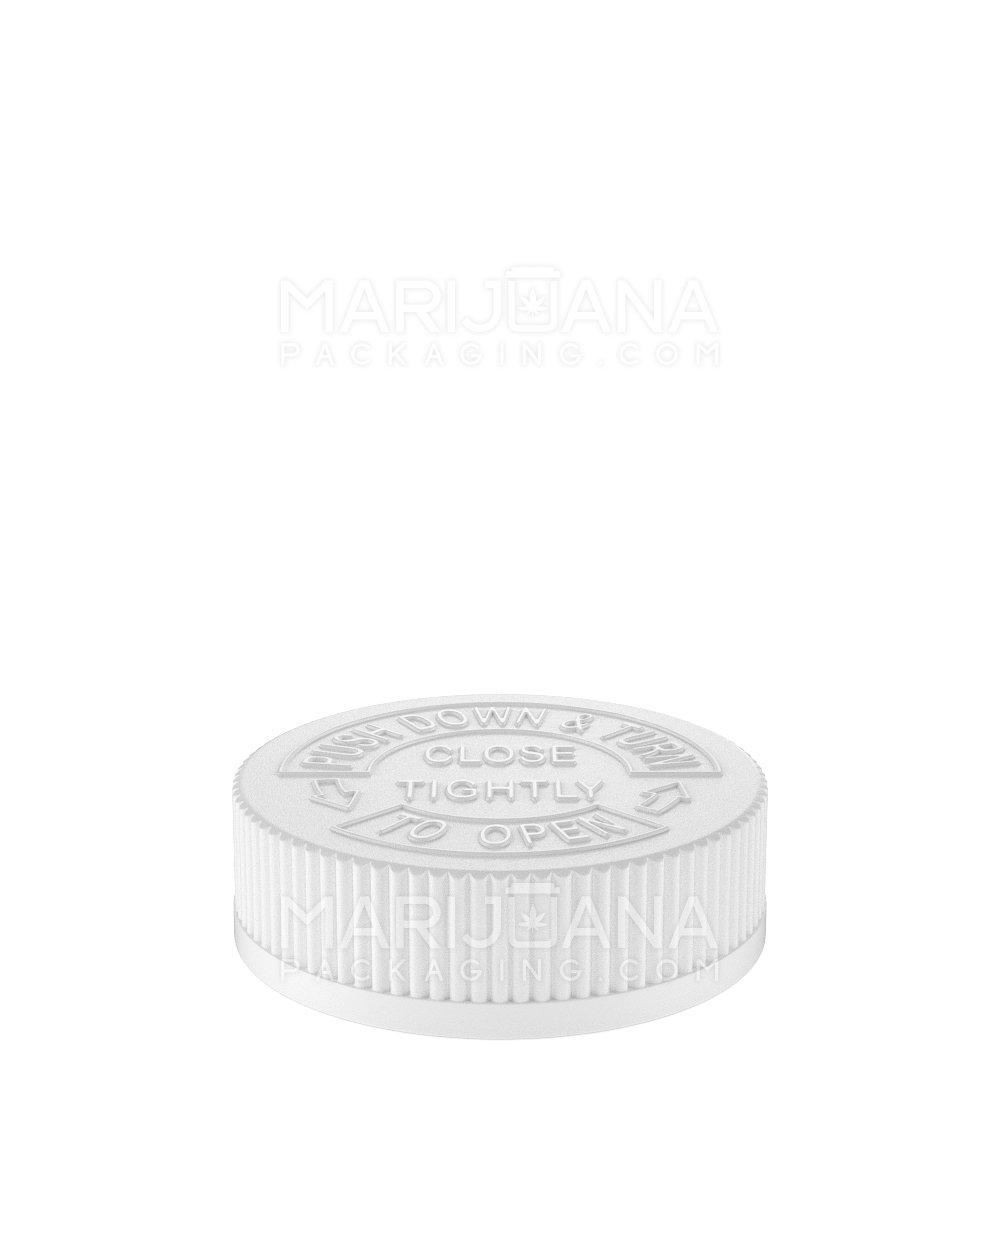 Child Resistant | Ribbed Push Down & Turn Plastic Caps | 53mm - Matte White - 120 Count - 3